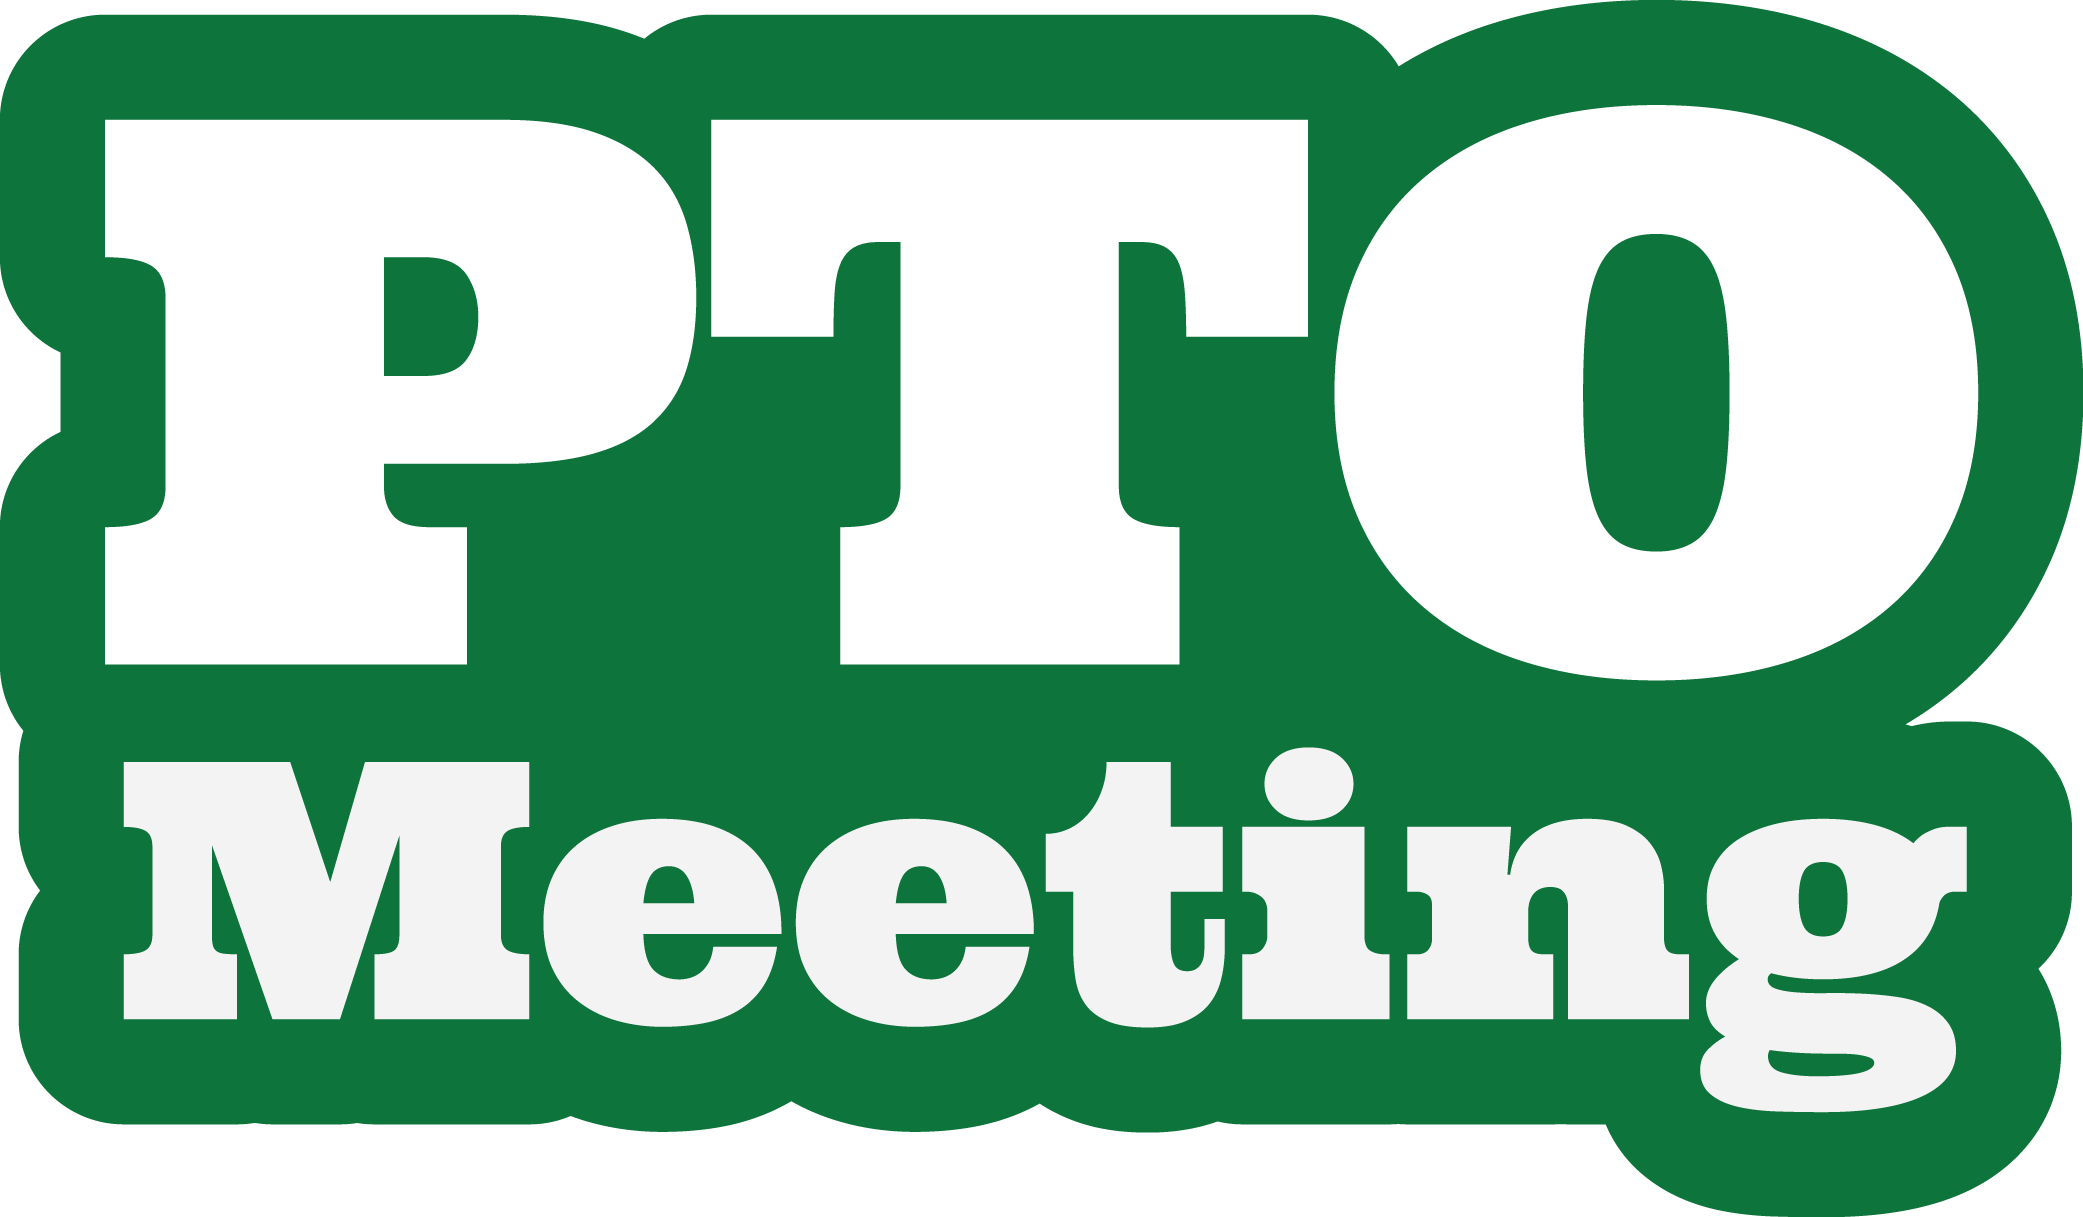 Please Join Us For The Next Pto Meeting On Tuesday December 8th At    